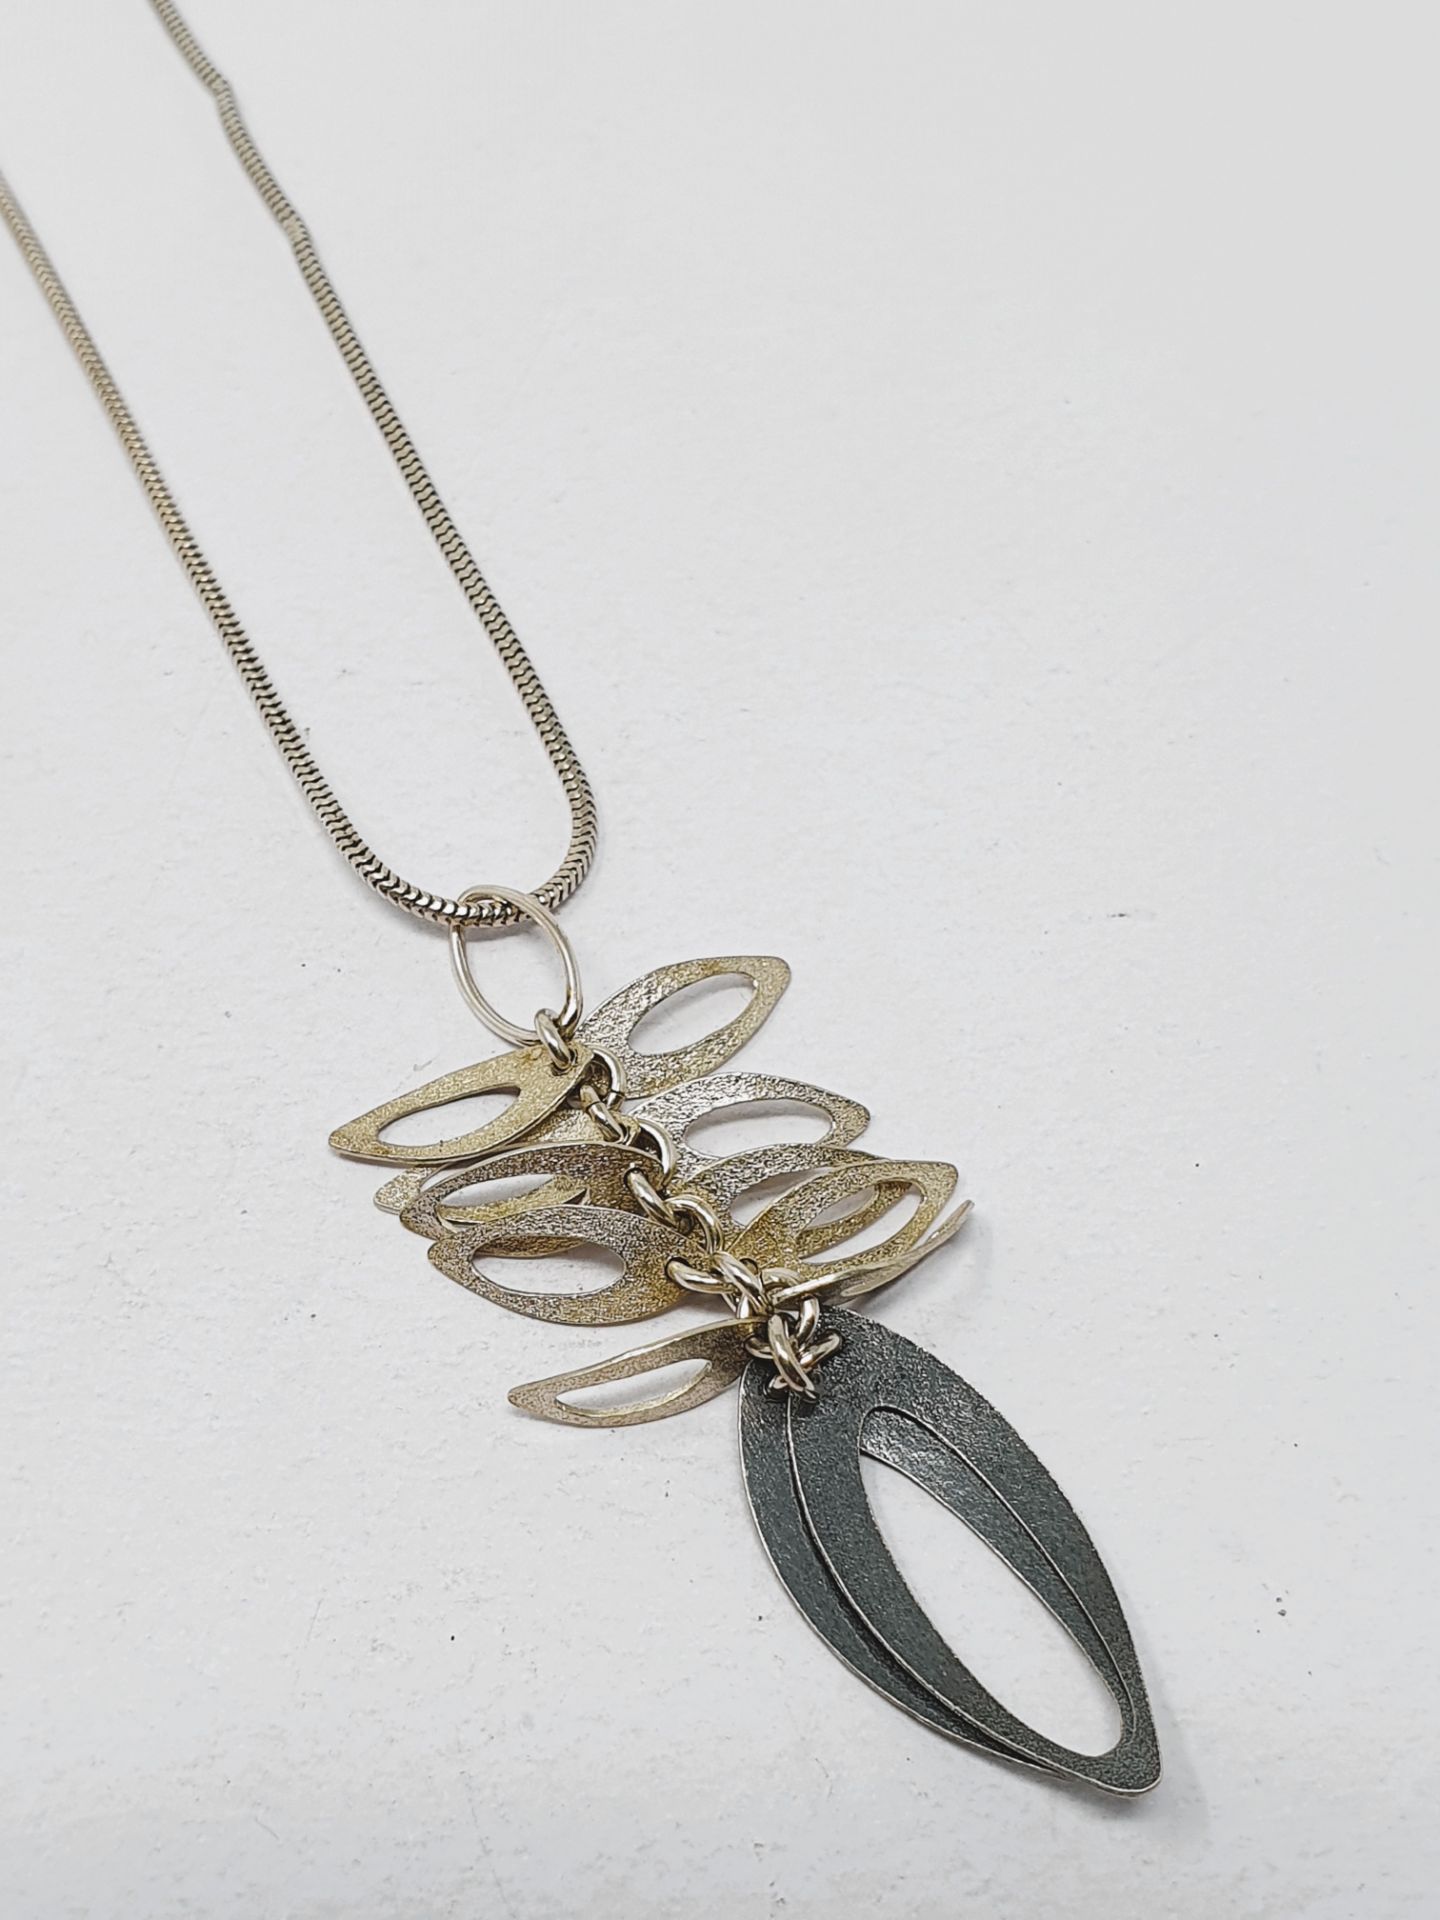 Sian Elizabeth Hughes, handmade sterling silver 'Foliage' necklace and two 'Bloom' pendants, - Image 4 of 5